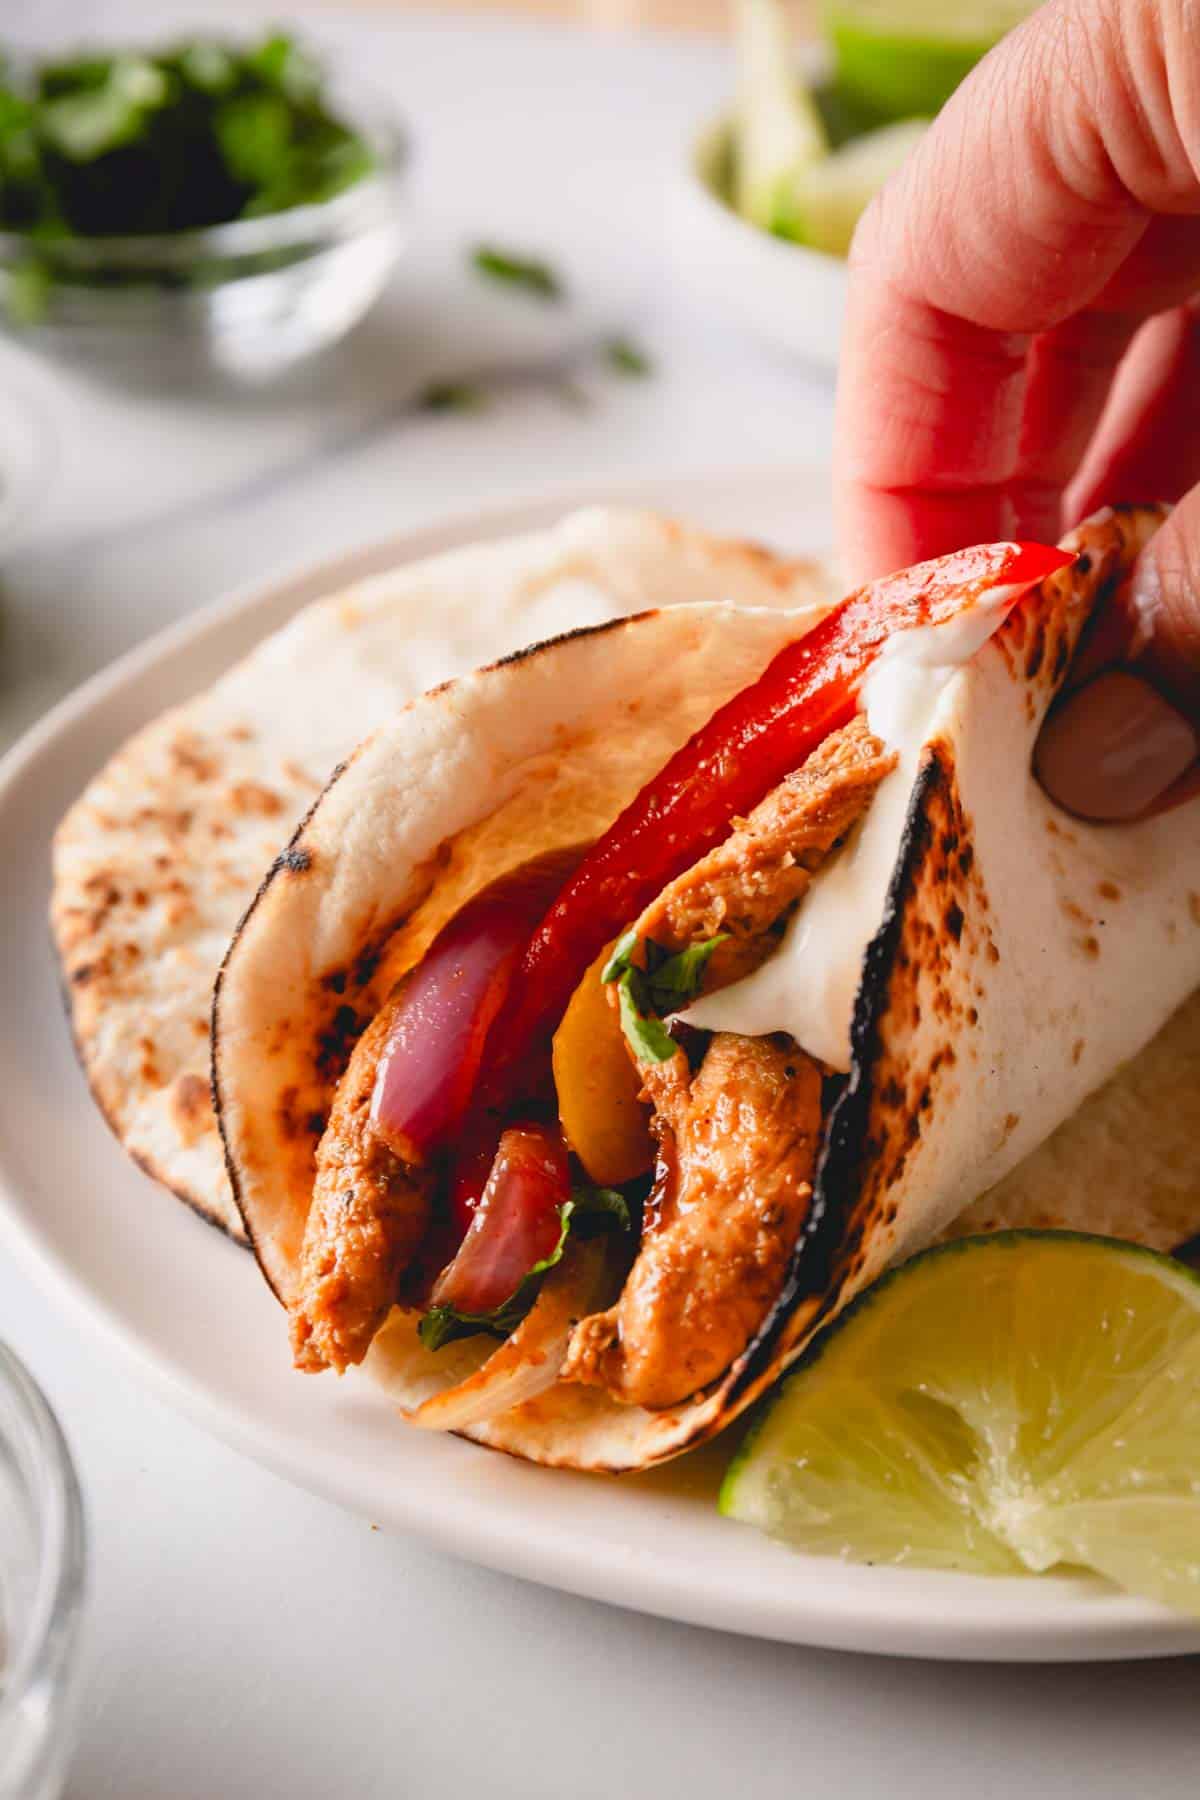 A hand holding a tortilla full of chicken fajitas topped with sour cream.